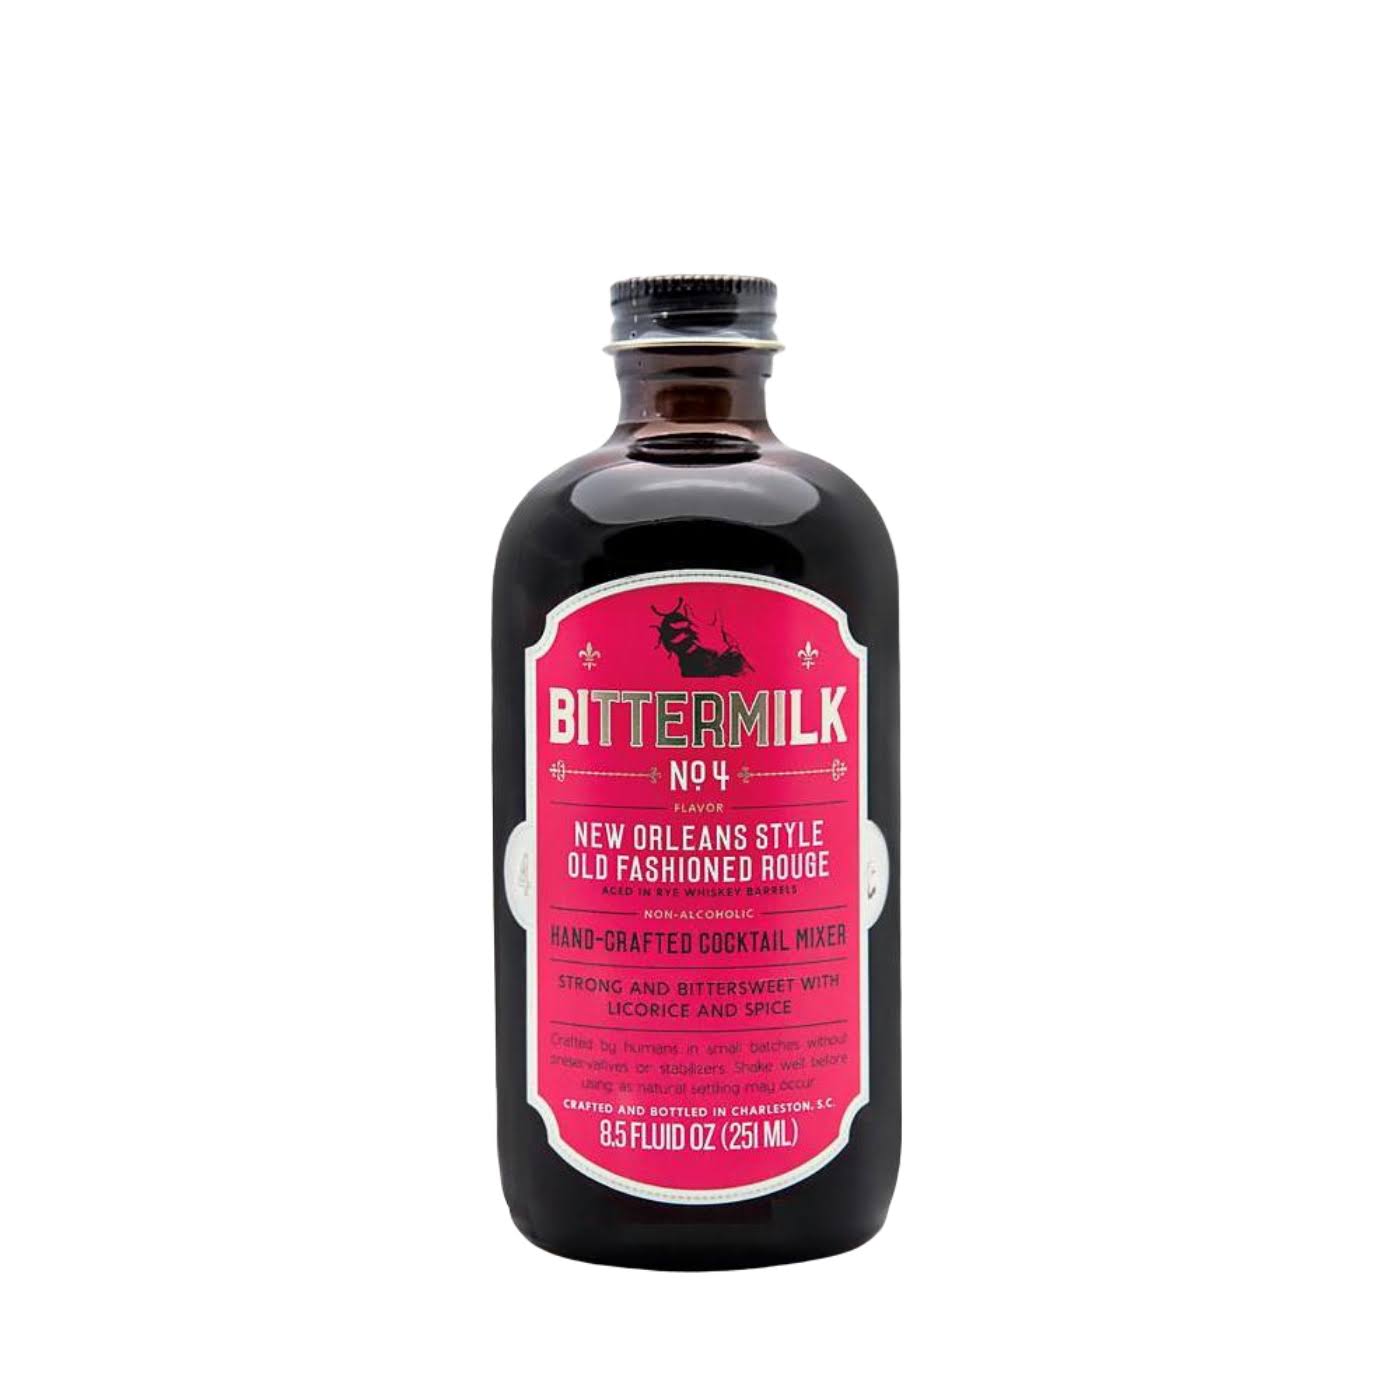 Bittermilk No.4 New Orleans Style Old Fashioned Rouge Cocktail - 8.5oz